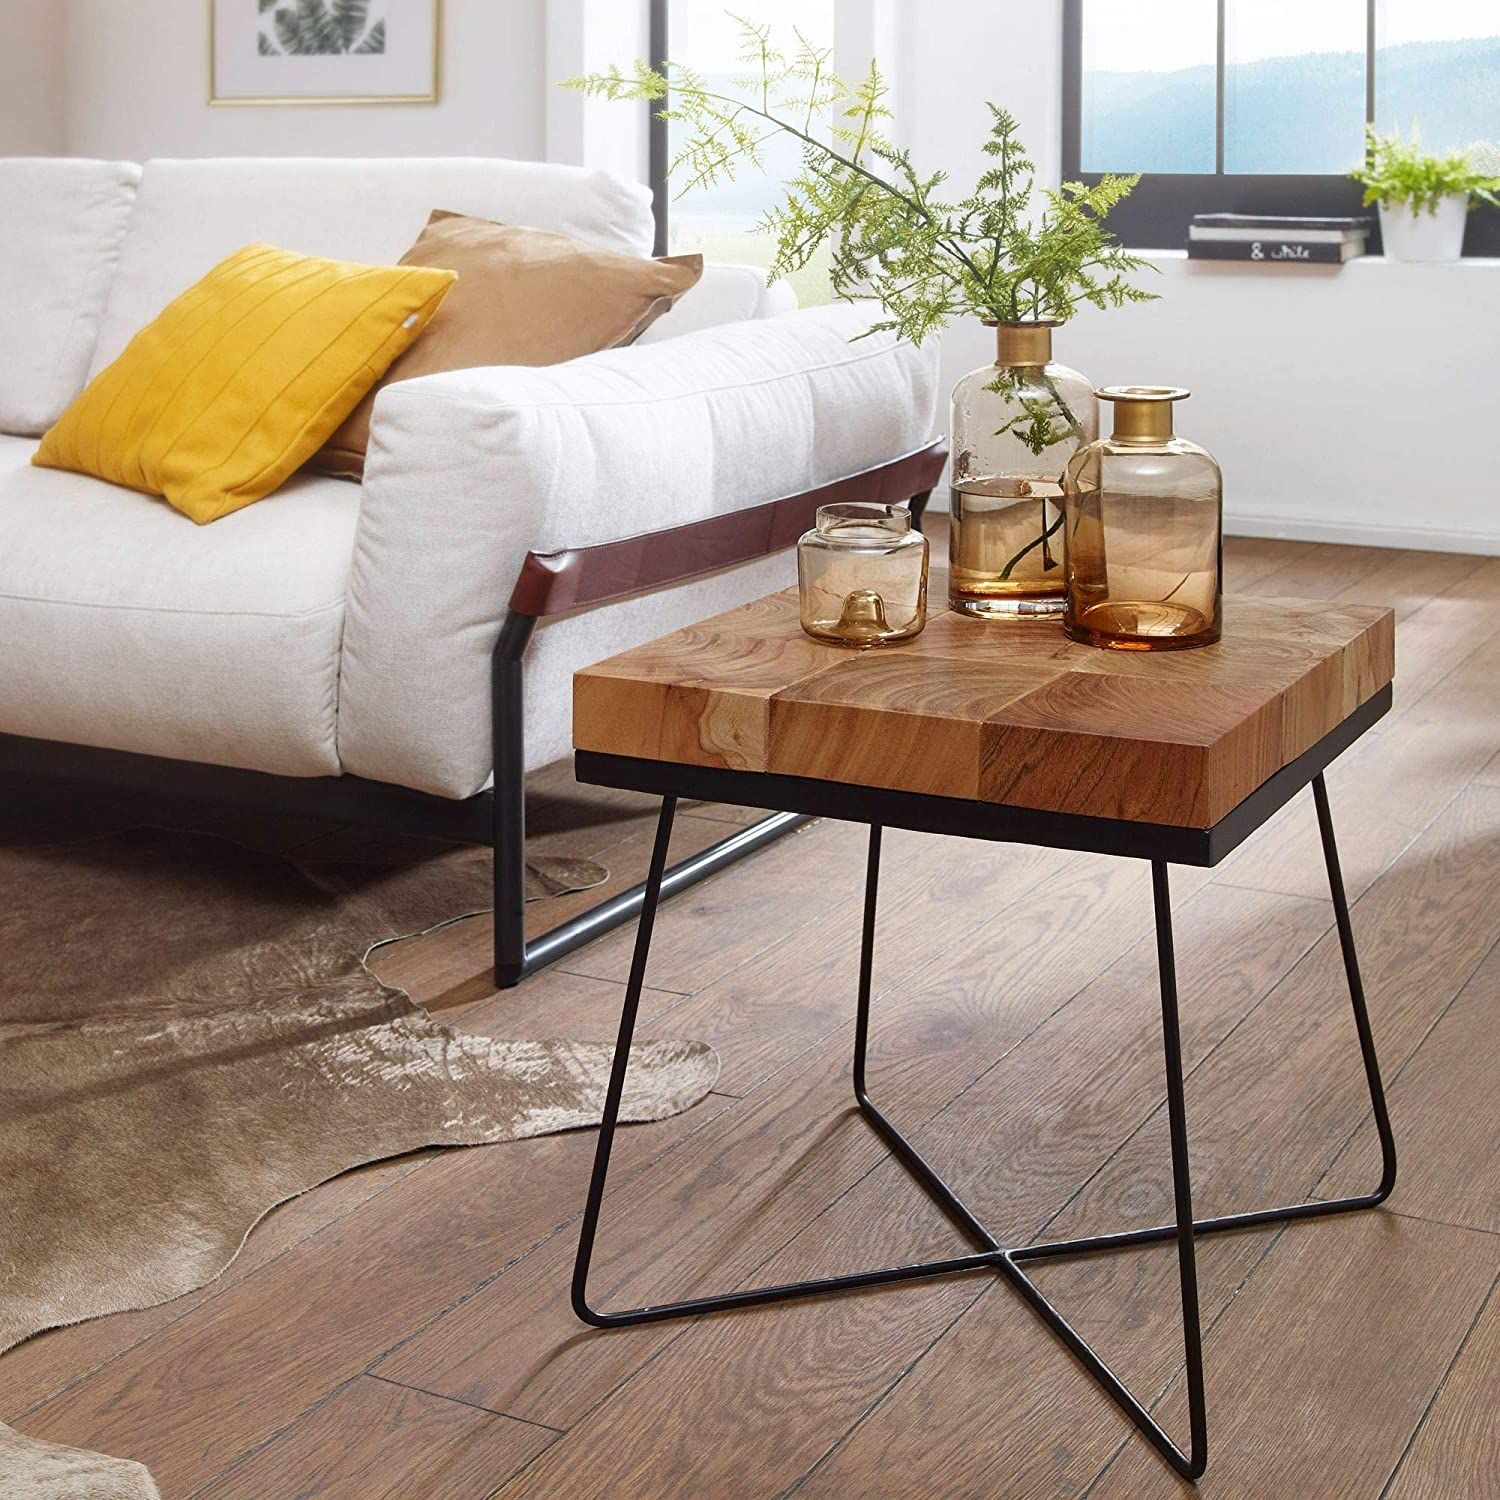 Heather Wood Side Table With Metal Legs – Decornation Within Coffee Tables With Metal Legs (View 12 of 15)